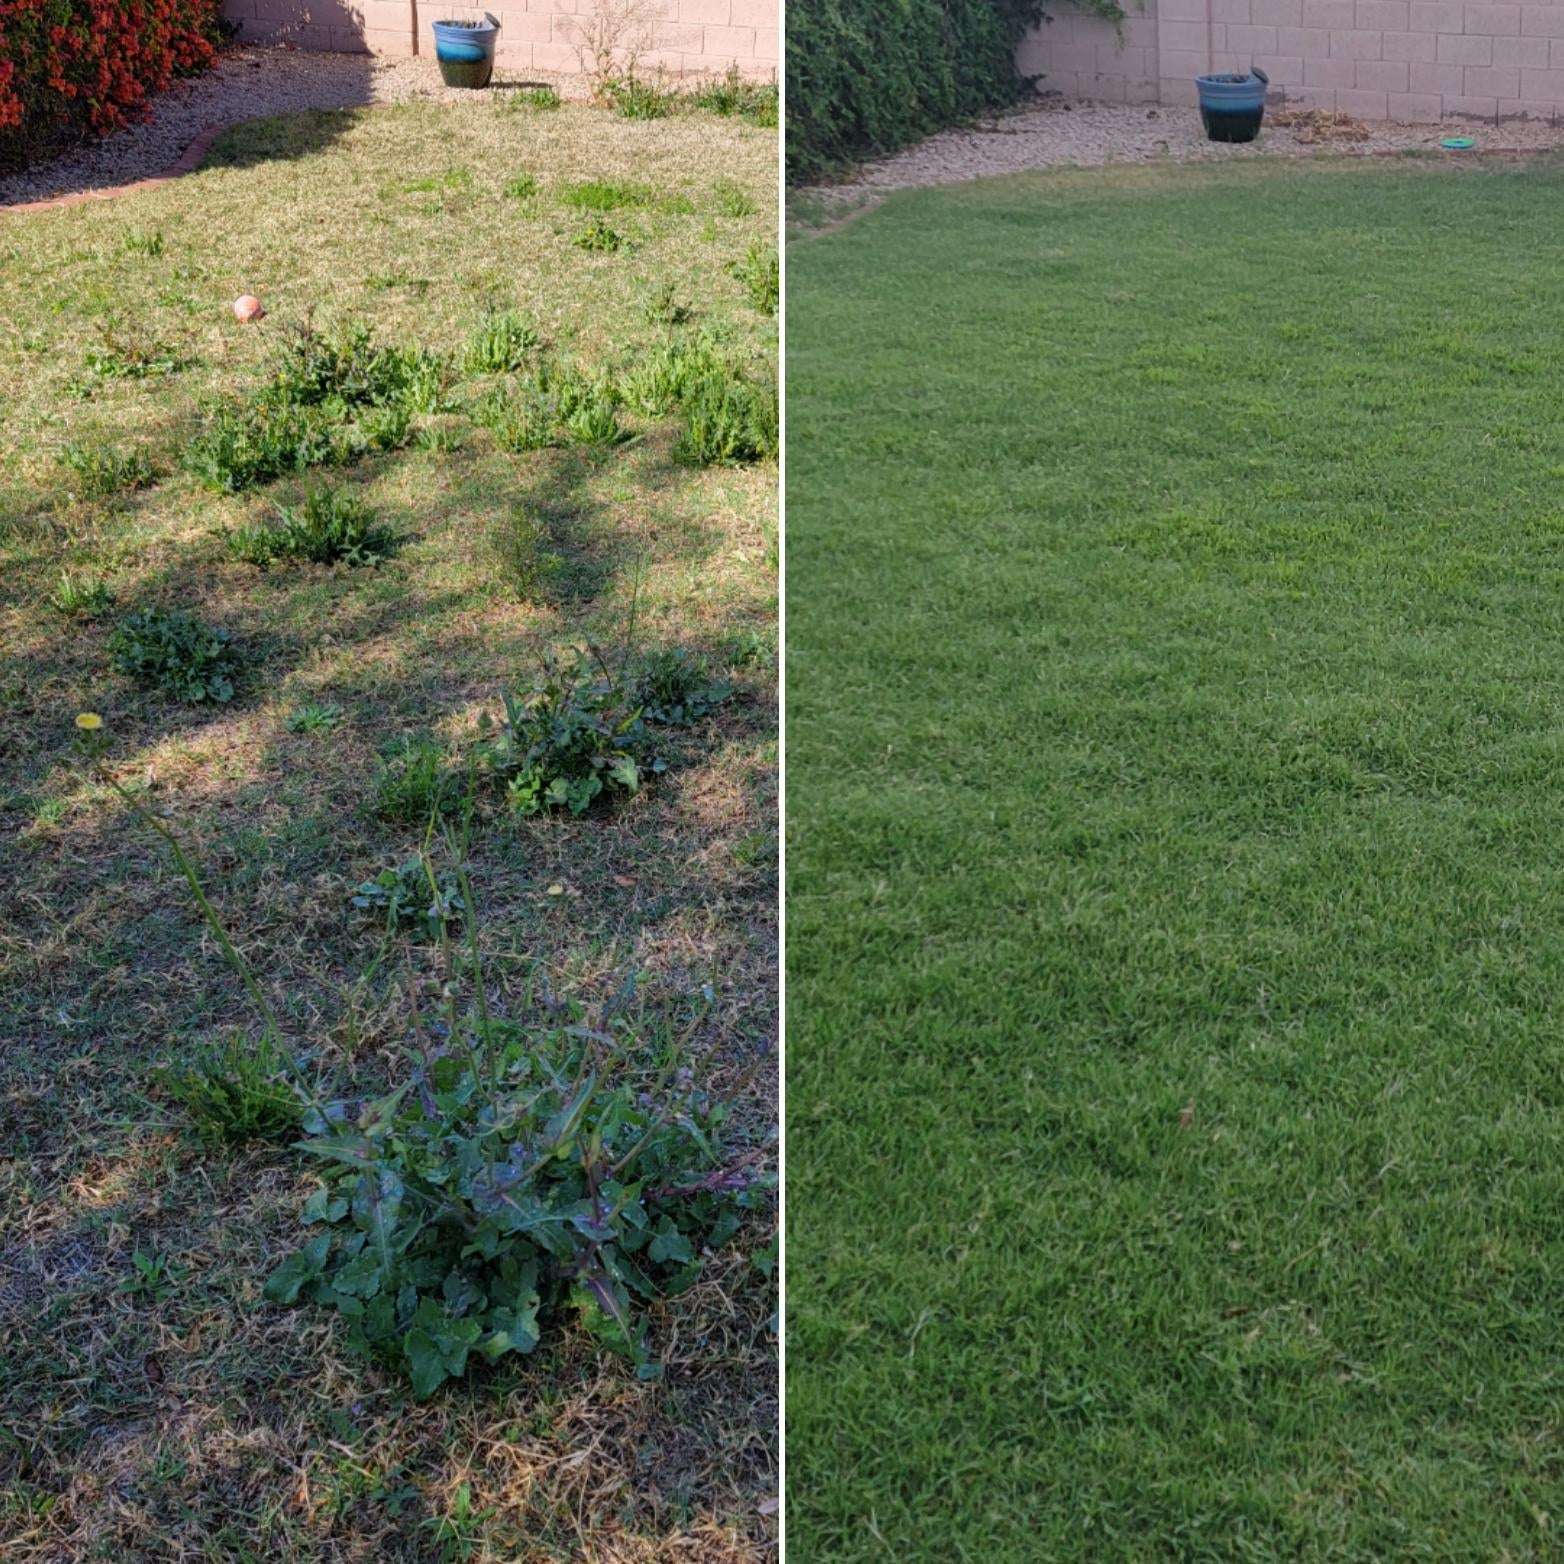 image showing [OC] I'm a first time homeowner and finally fixed up my shitty lawn! (Still lots to do -_-)